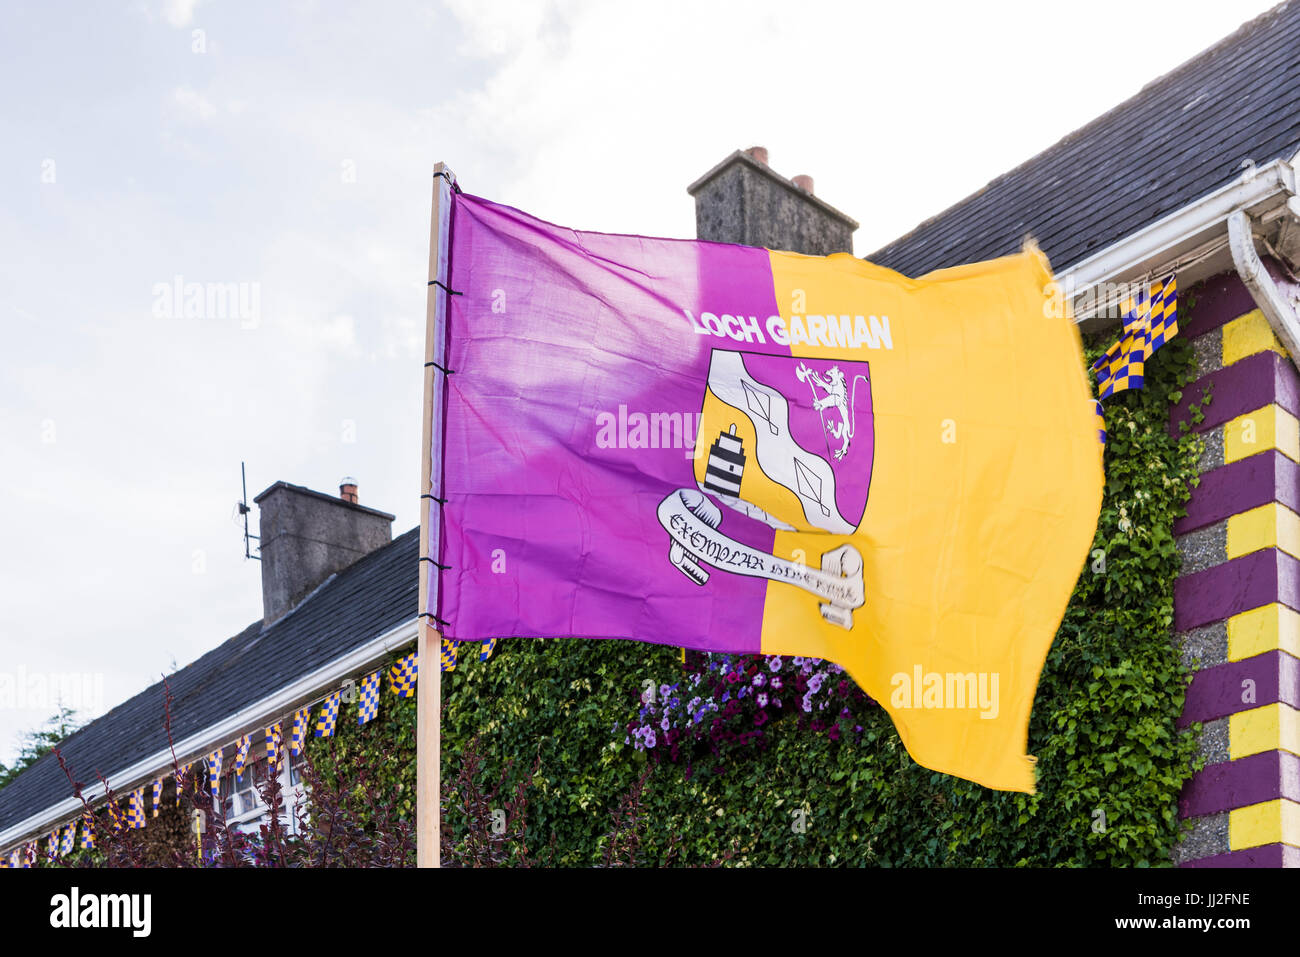 A house in County Wexford decorated in lots of flowers, and the flags and colours of the Wexford GAA taam, purple and yellow. Stock Photo